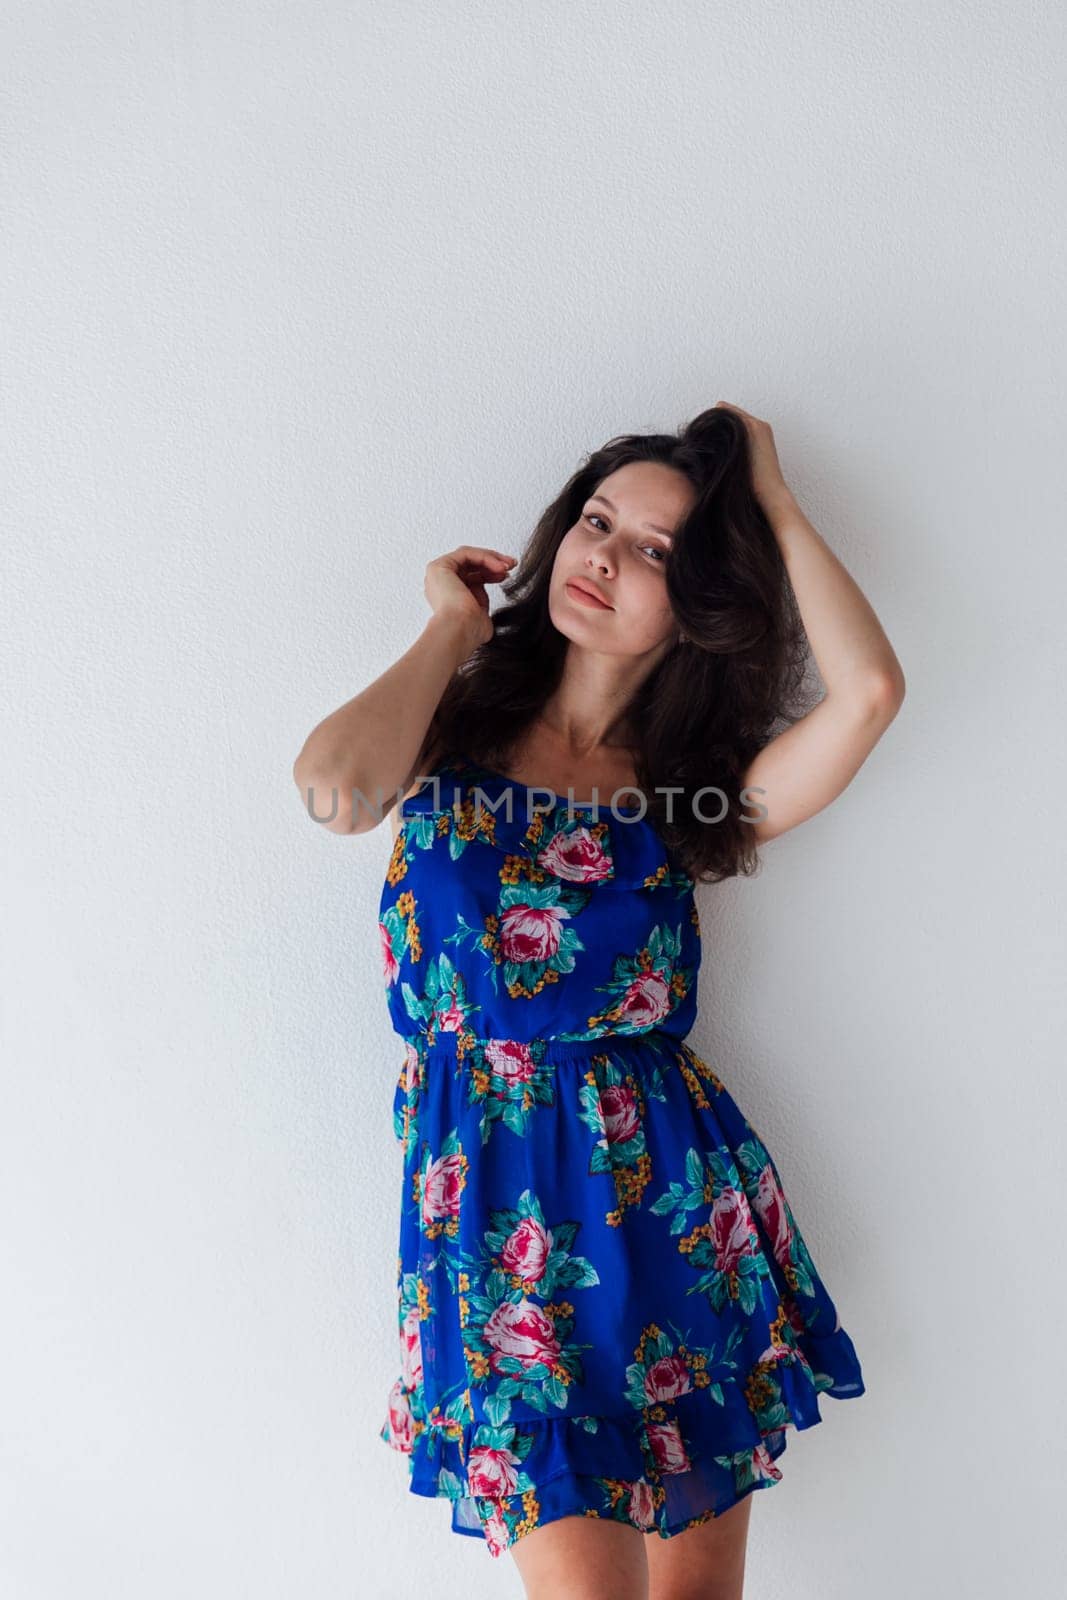 beautiful woman in a blue floral dress on a white background by Simakov